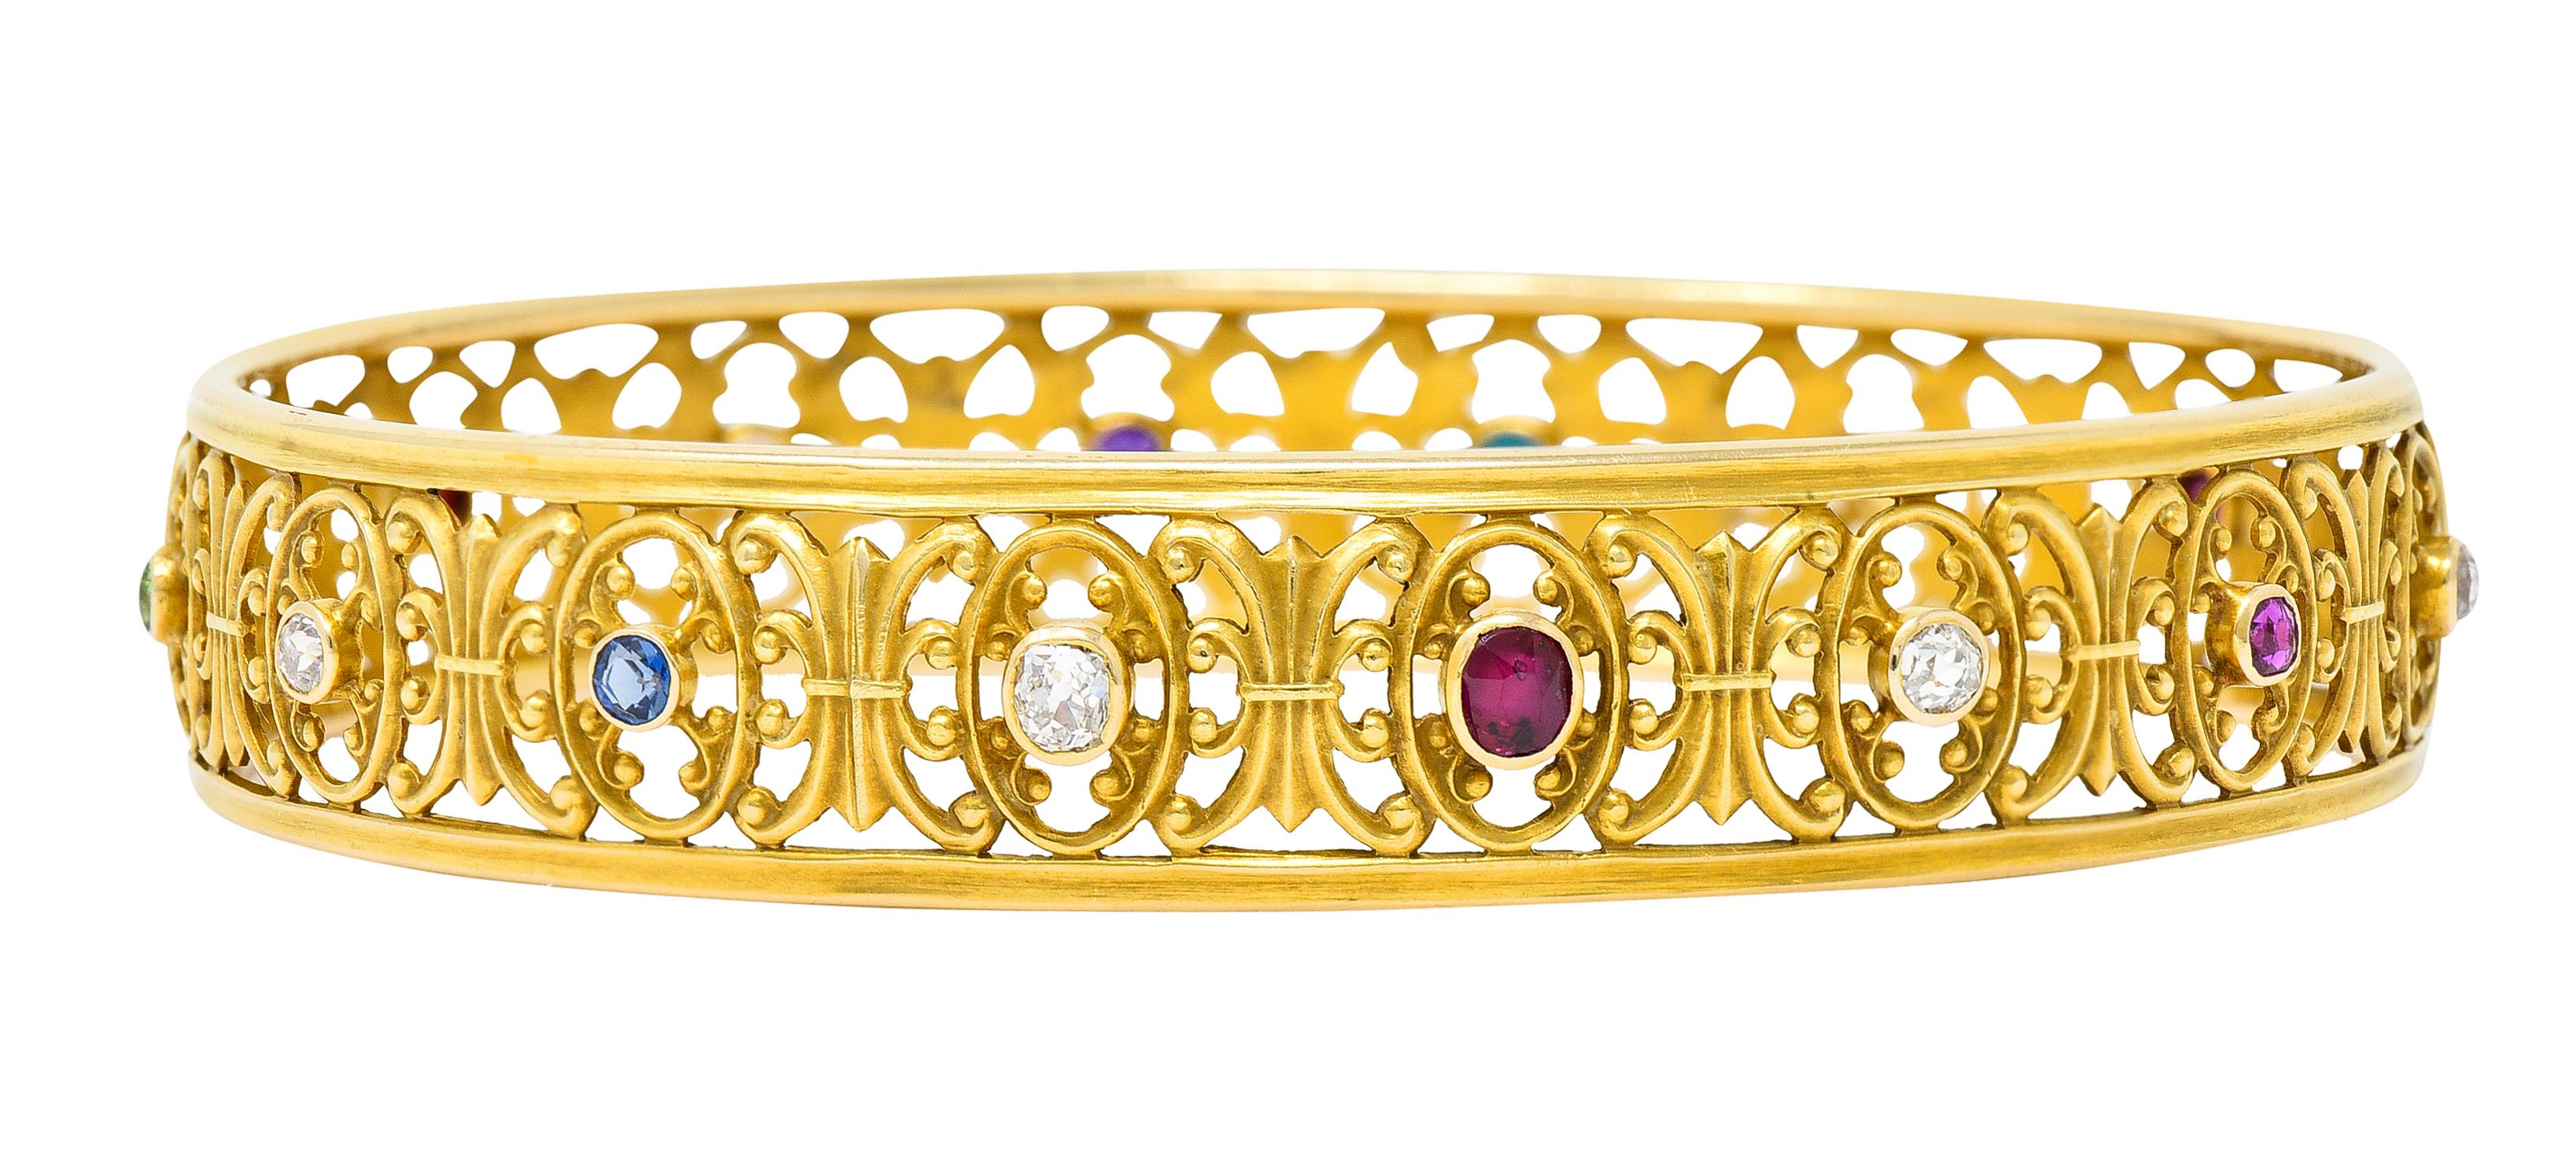 Bangle bracelet is decoratively pierced with scrolling flourishes and cartouches. With bezel set gemstones fully around - citrine, demantoid garnet, amethyst, turquoise, and opal. While featuring sapphires, rubies, and diamonds weighing collectively